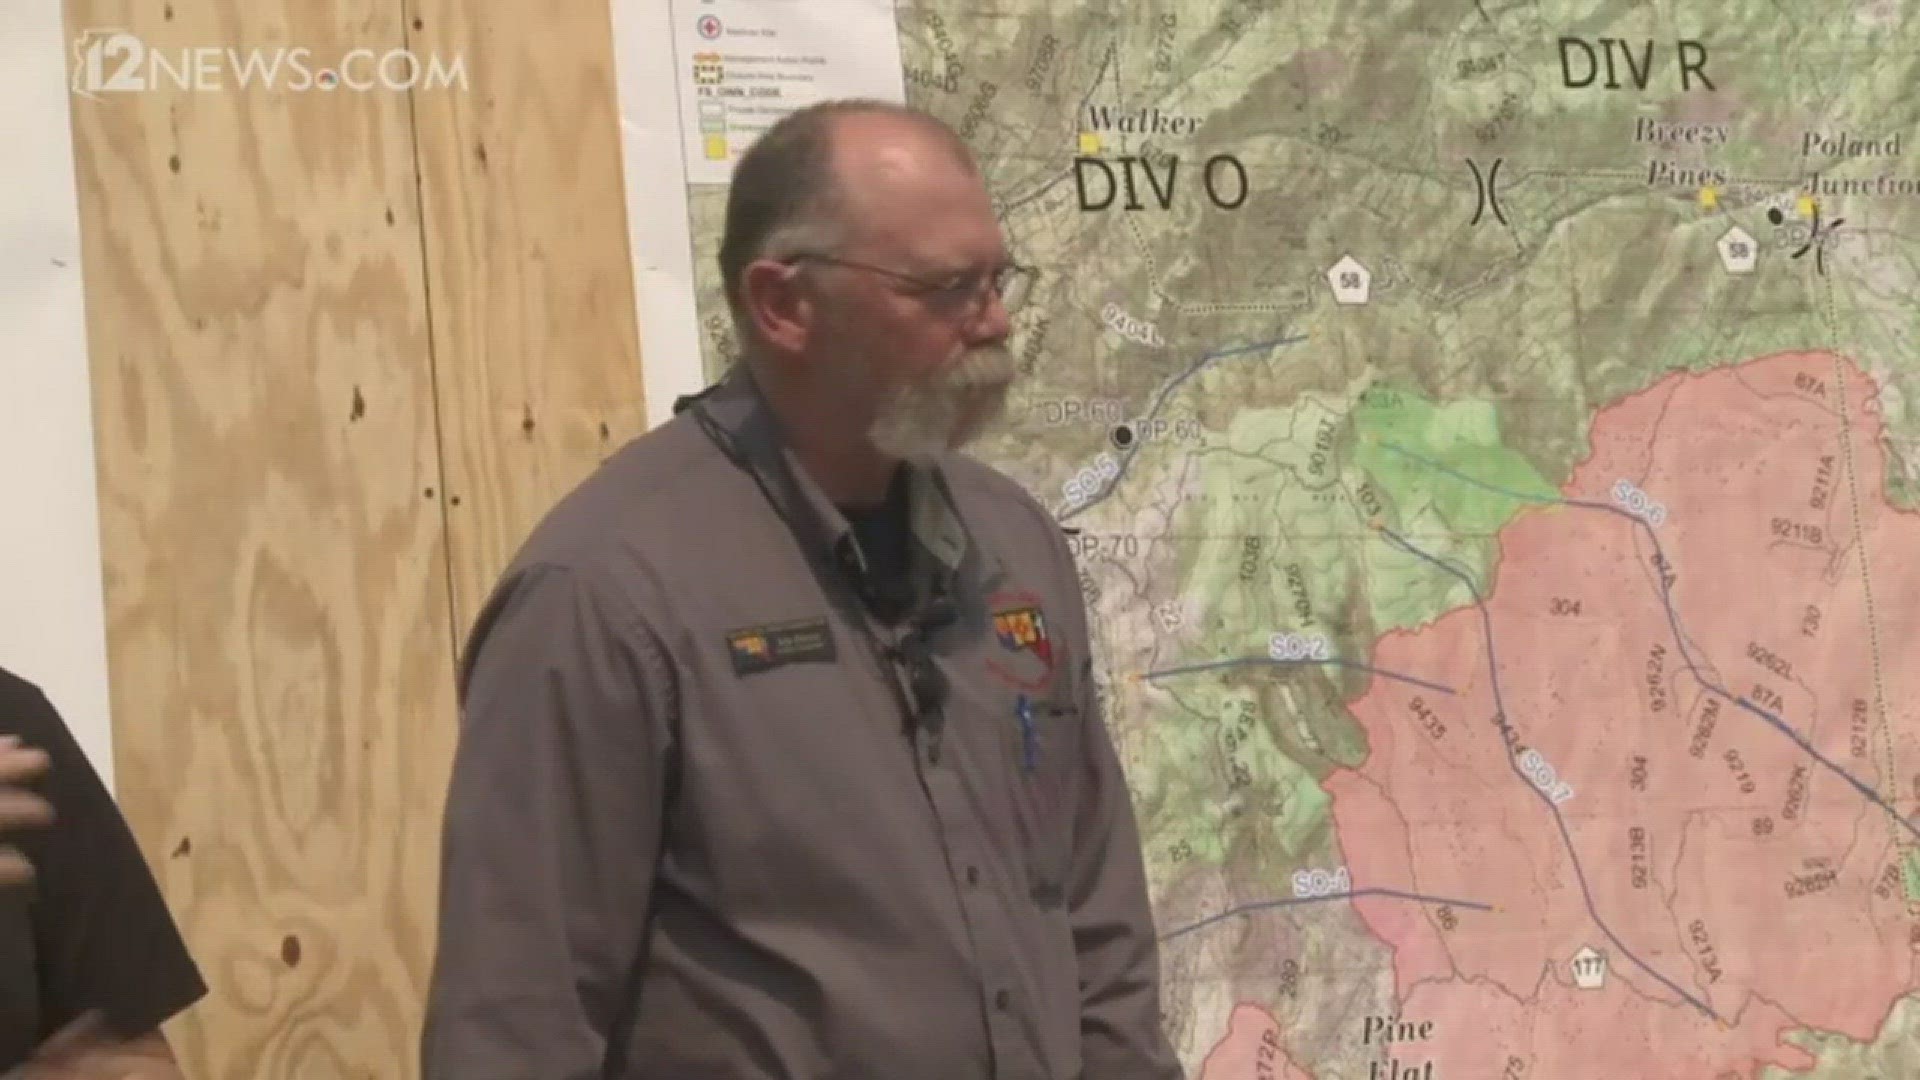 Authorities addressed the media Wednesday morning and provided details on the Goodwin fire that has burned over 20,000 acres.